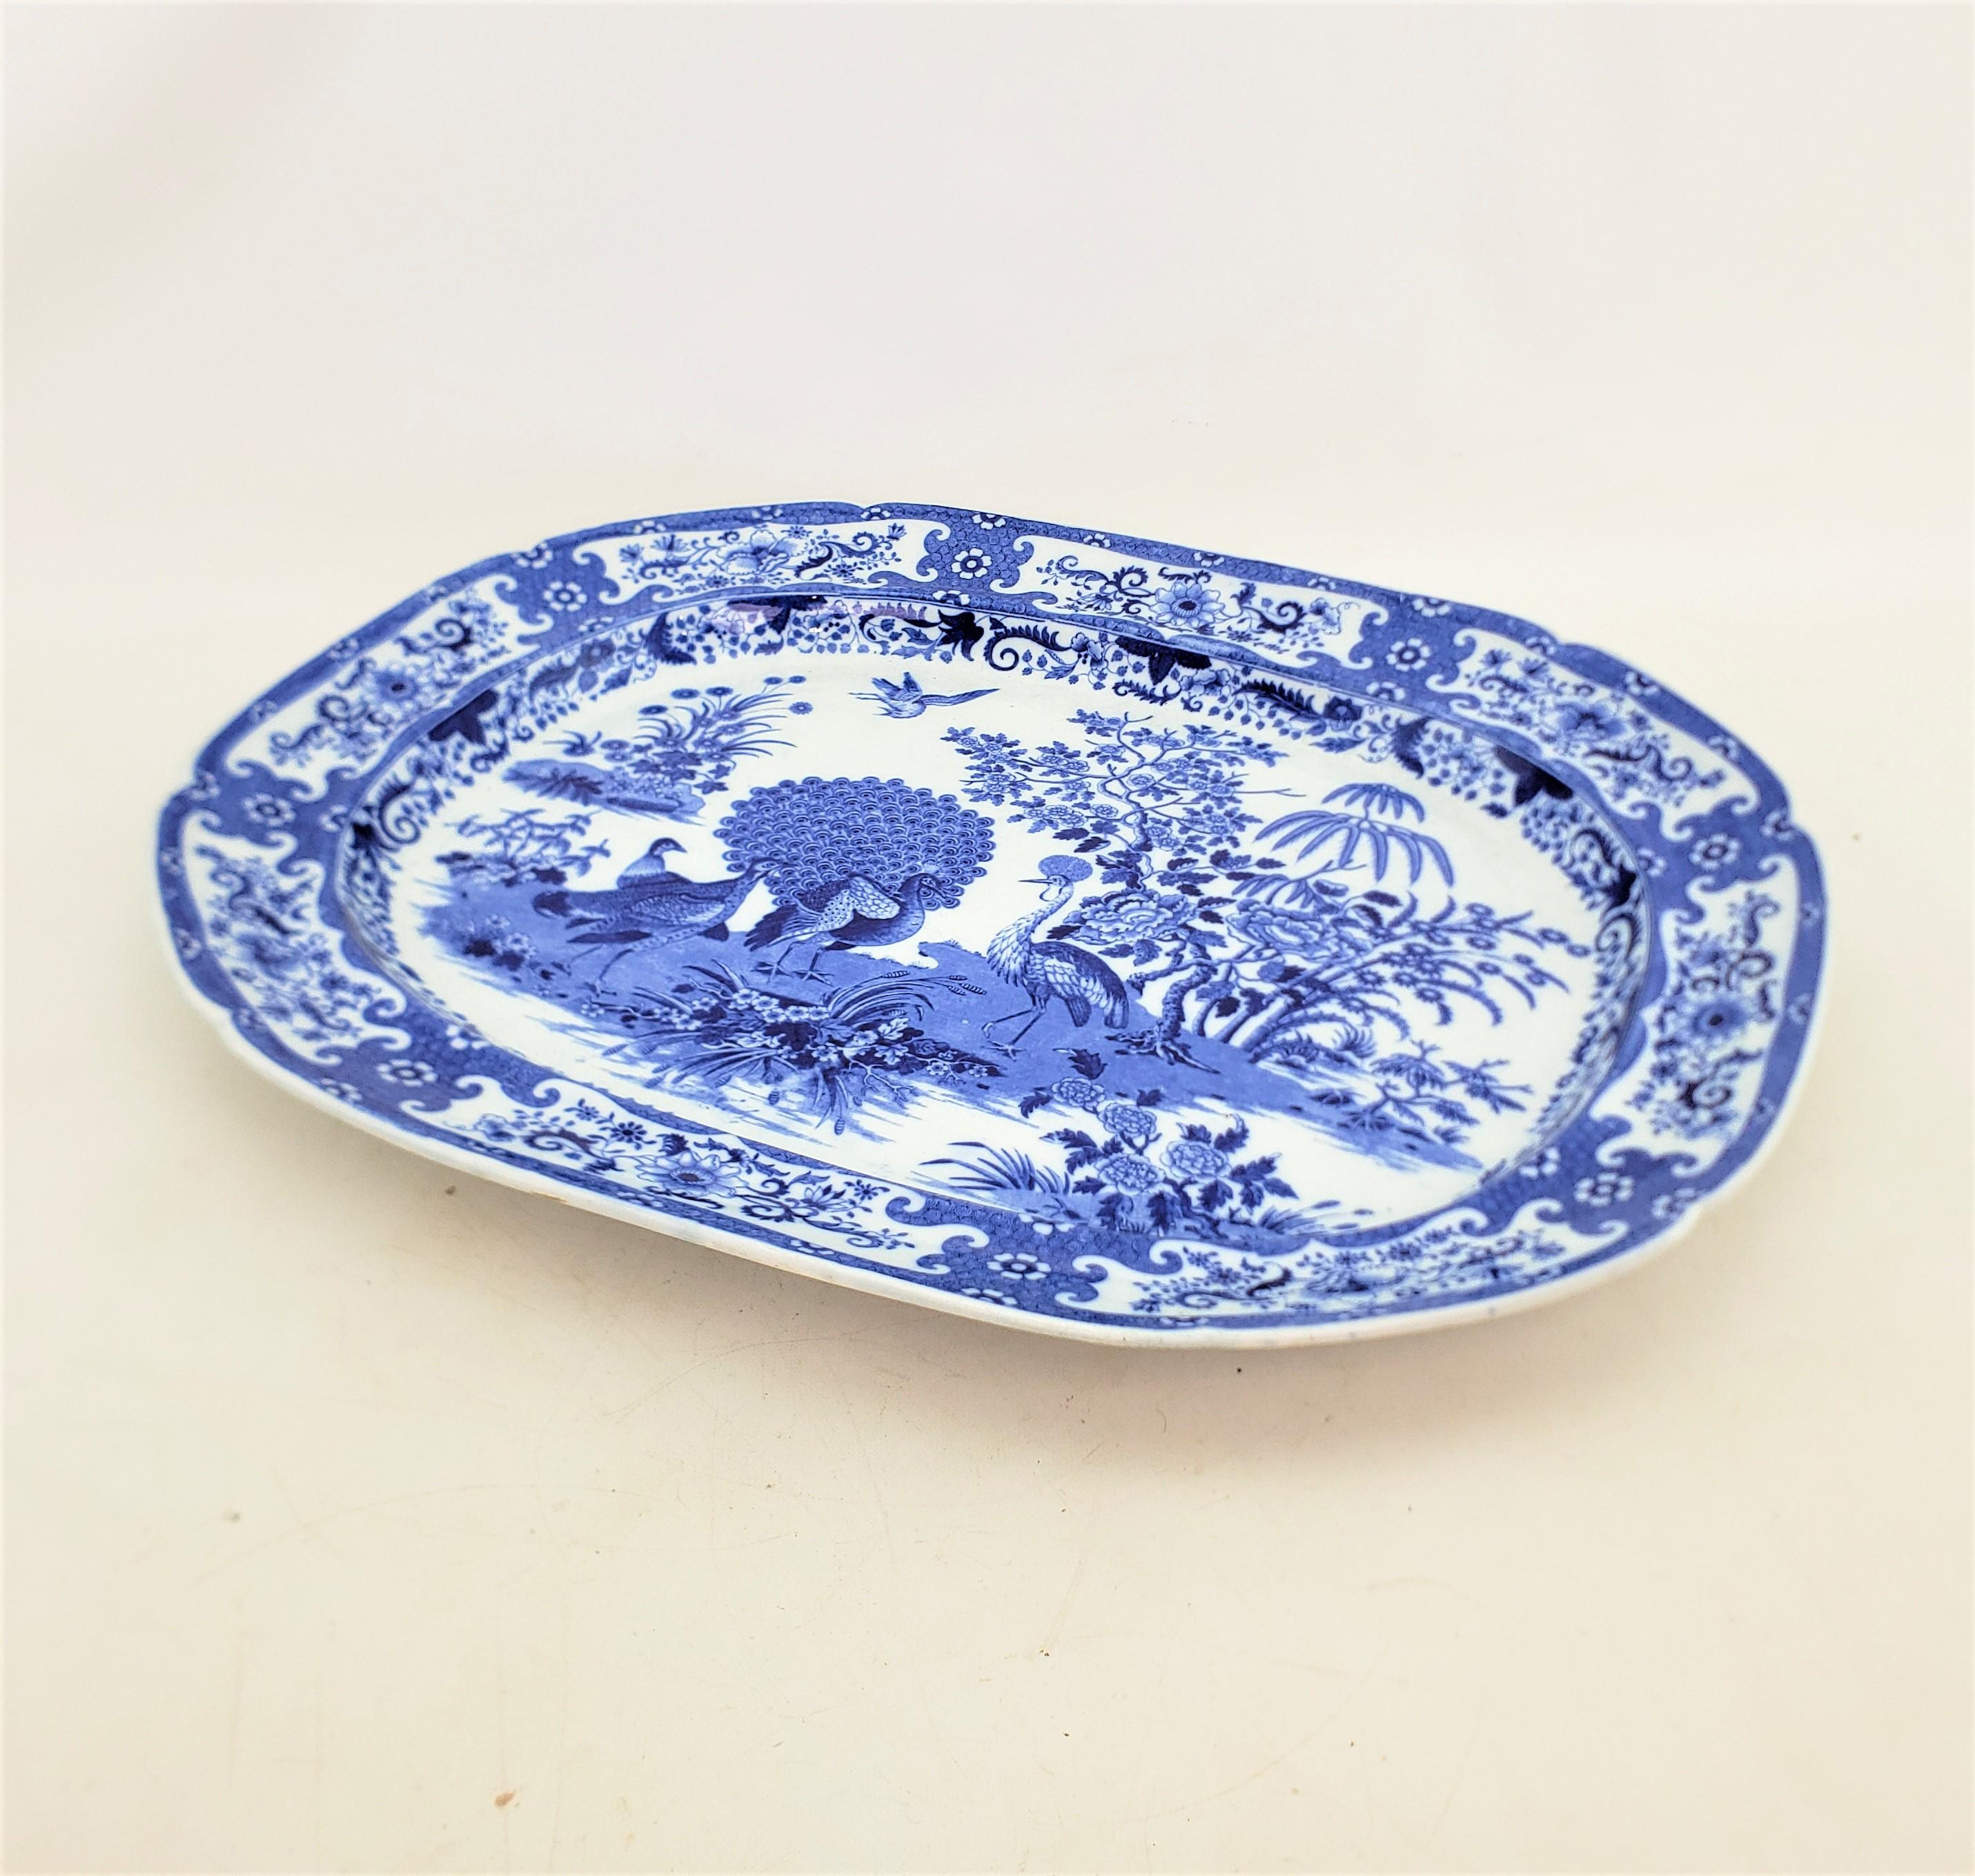 This large and substantial serving platter is unsigned, but presumed to have originated from England and date to approximately 1880 and done in the period Victorian style. The platter is composed of ceramic with a bright cobalt blue tranfer on the